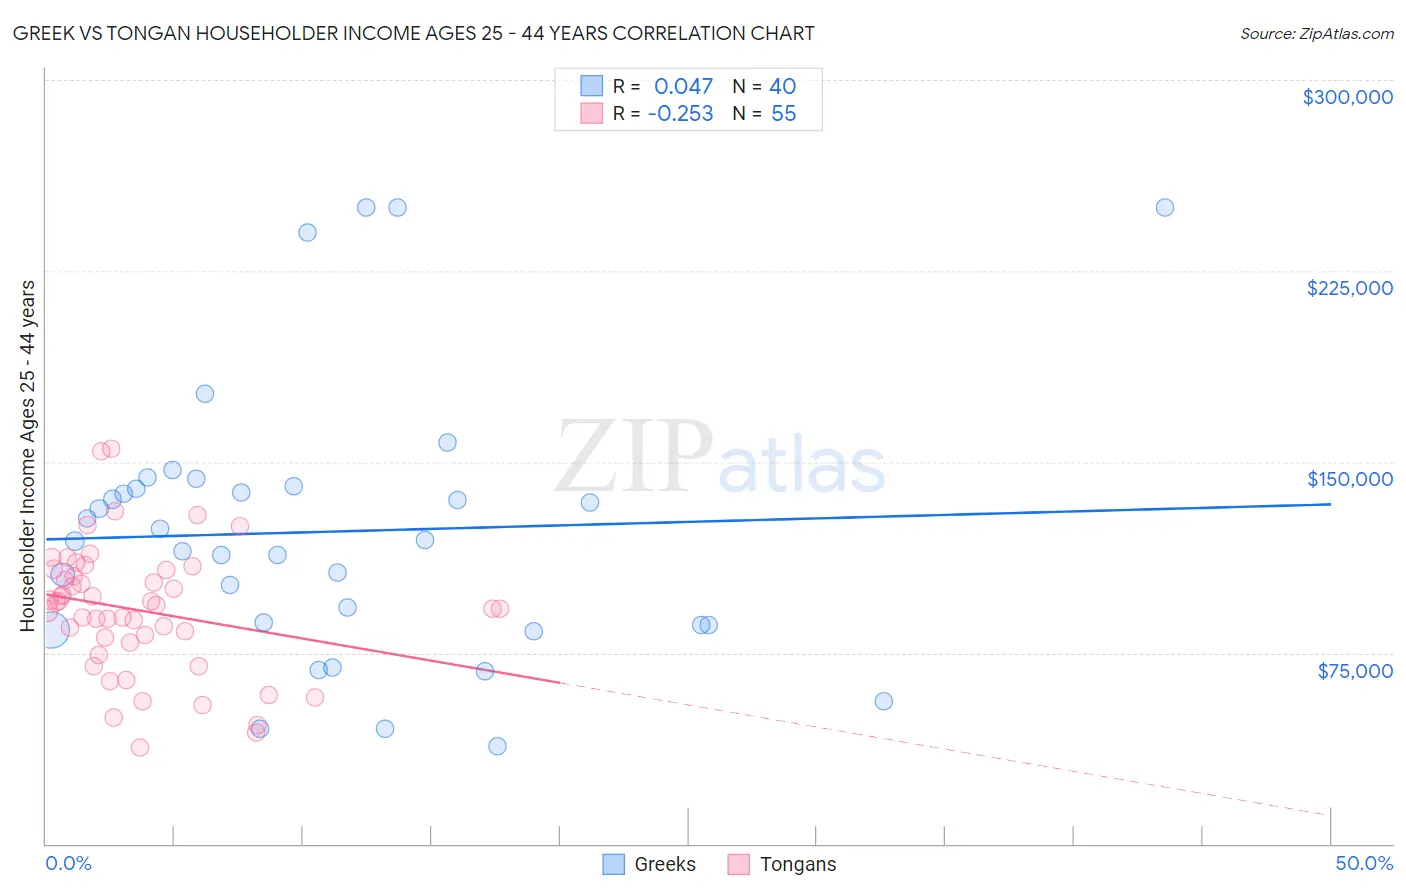 Greek vs Tongan Householder Income Ages 25 - 44 years